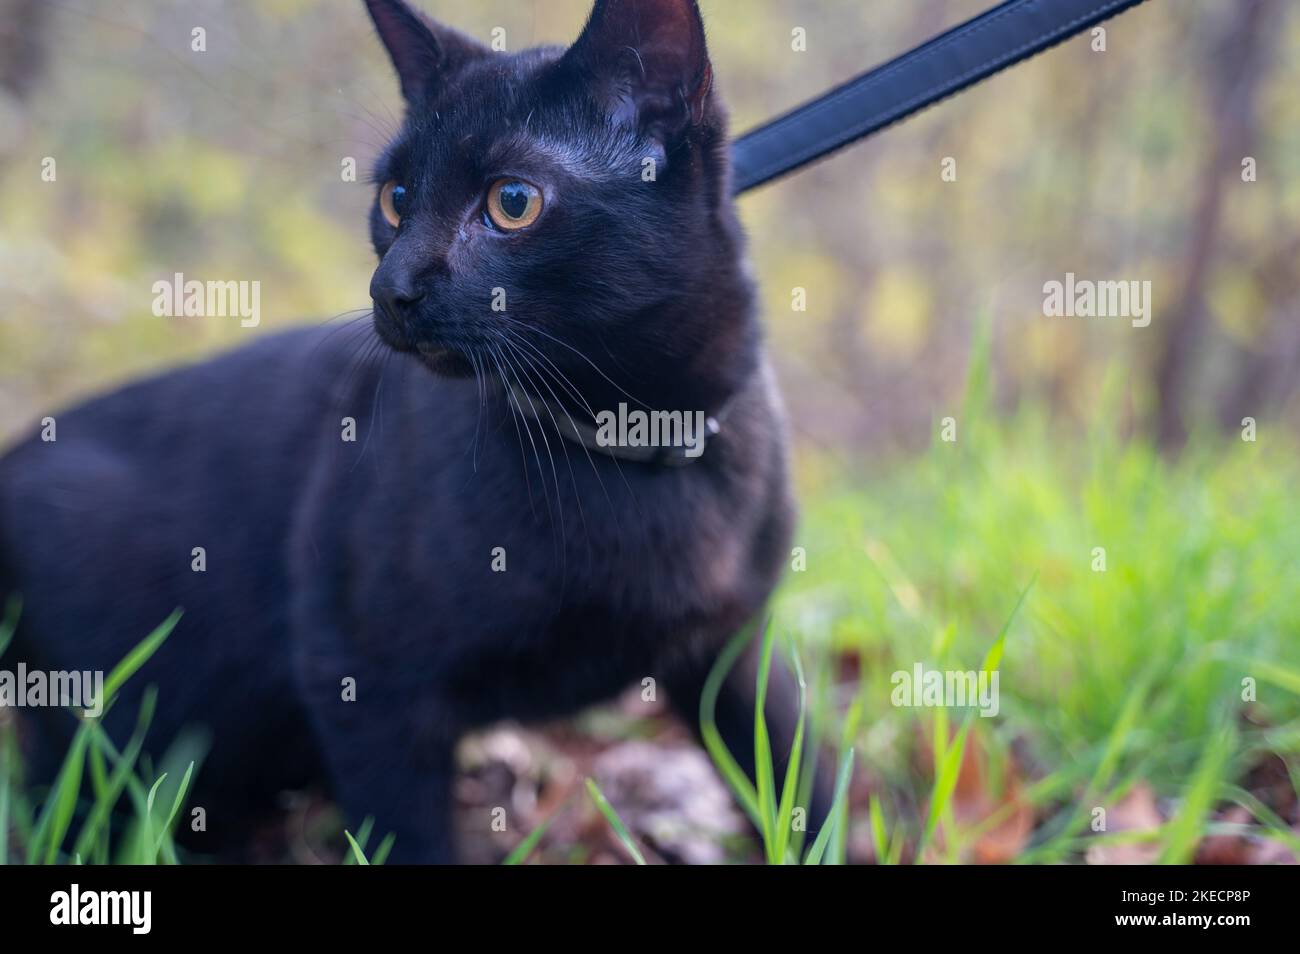 A curious black cat on a leash discovers nature Stock Photo